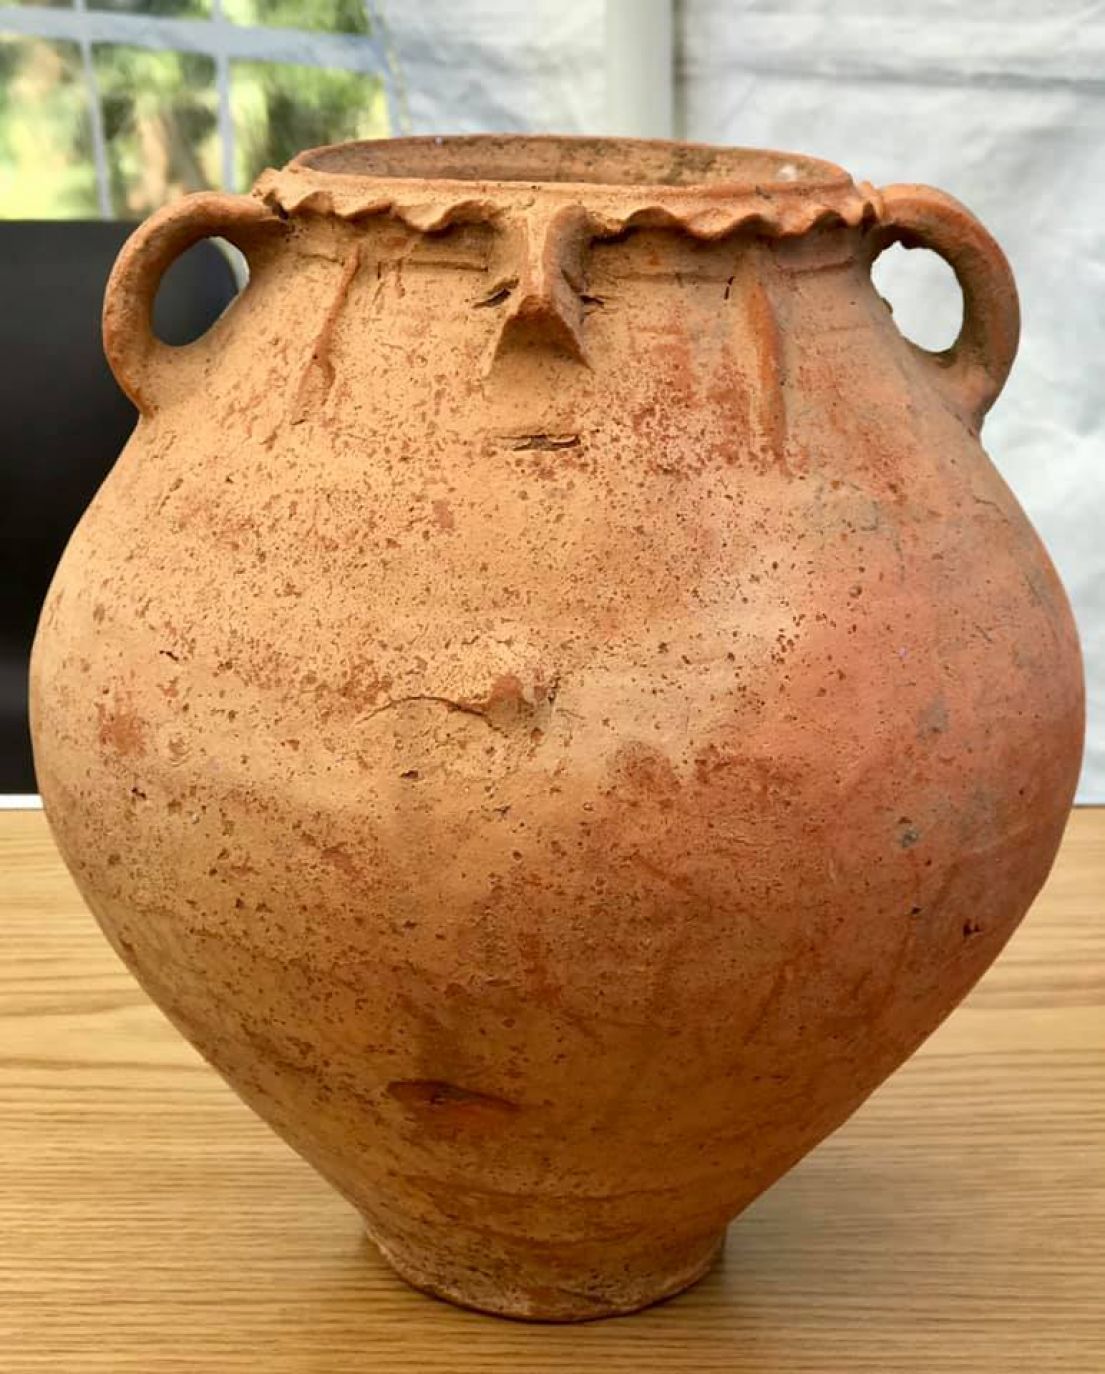 A reddish brown pot, with a decorated rim and two small handles at either side at the top.